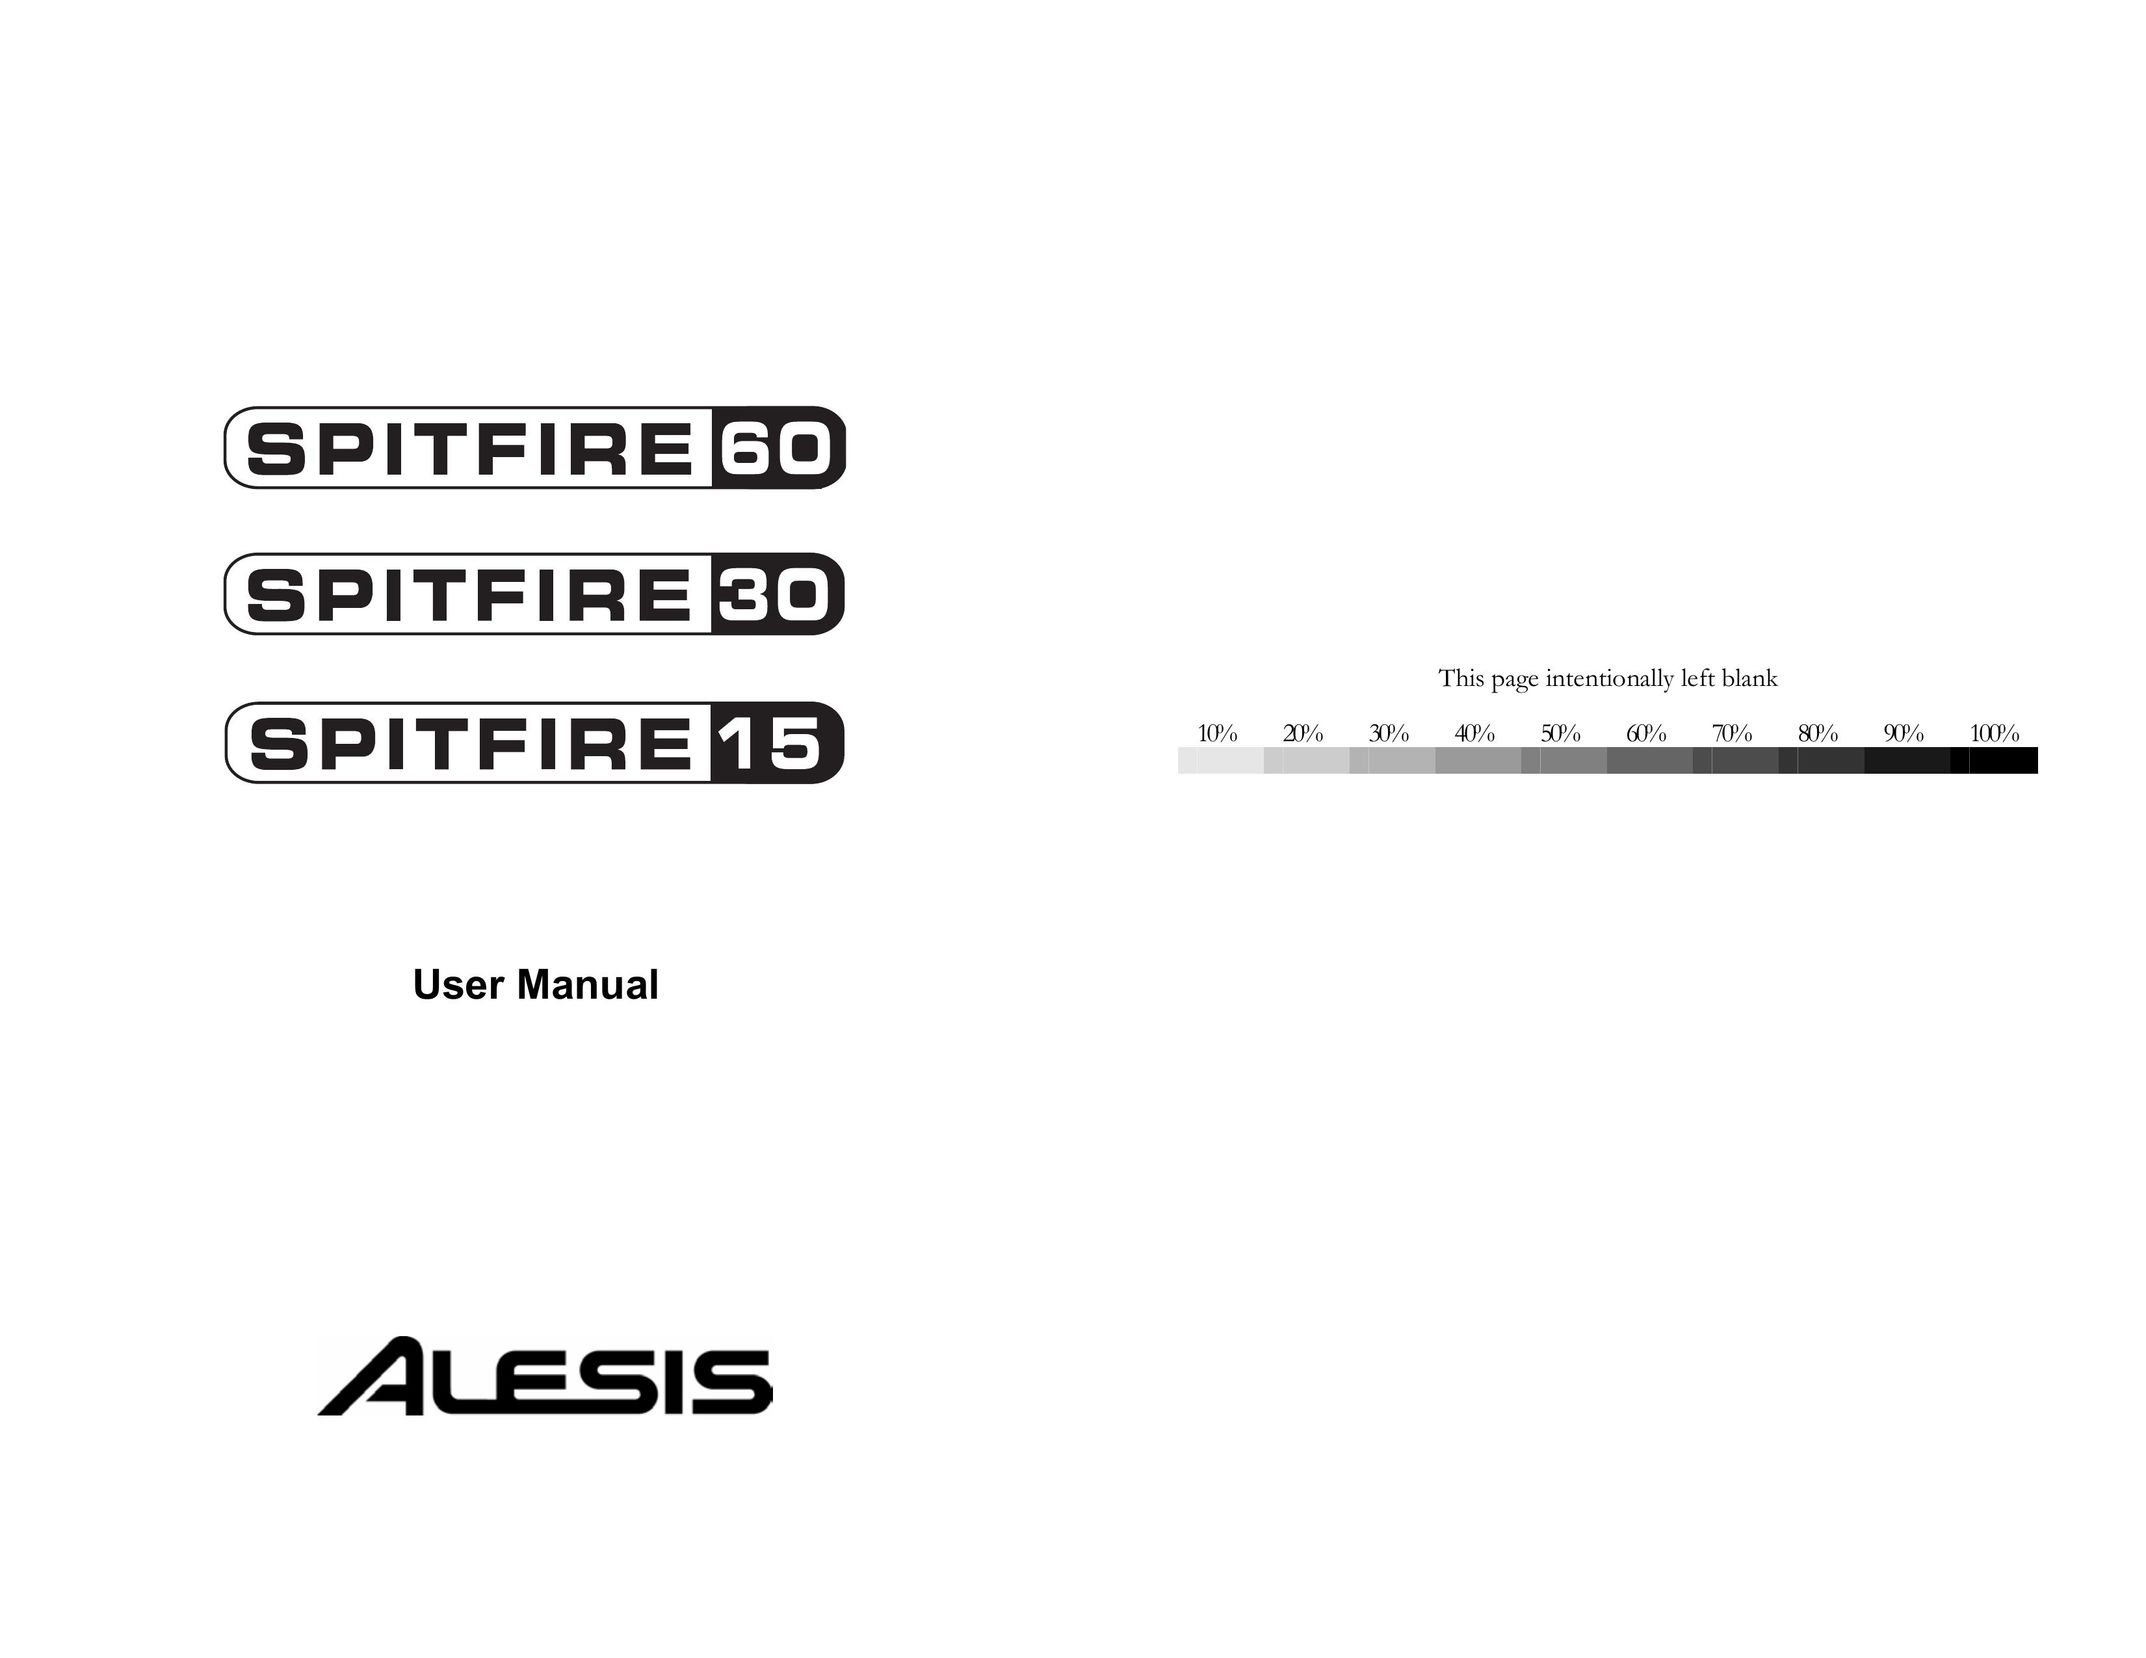 Alesis Spitfire 30 Stereo Amplifier User Manual